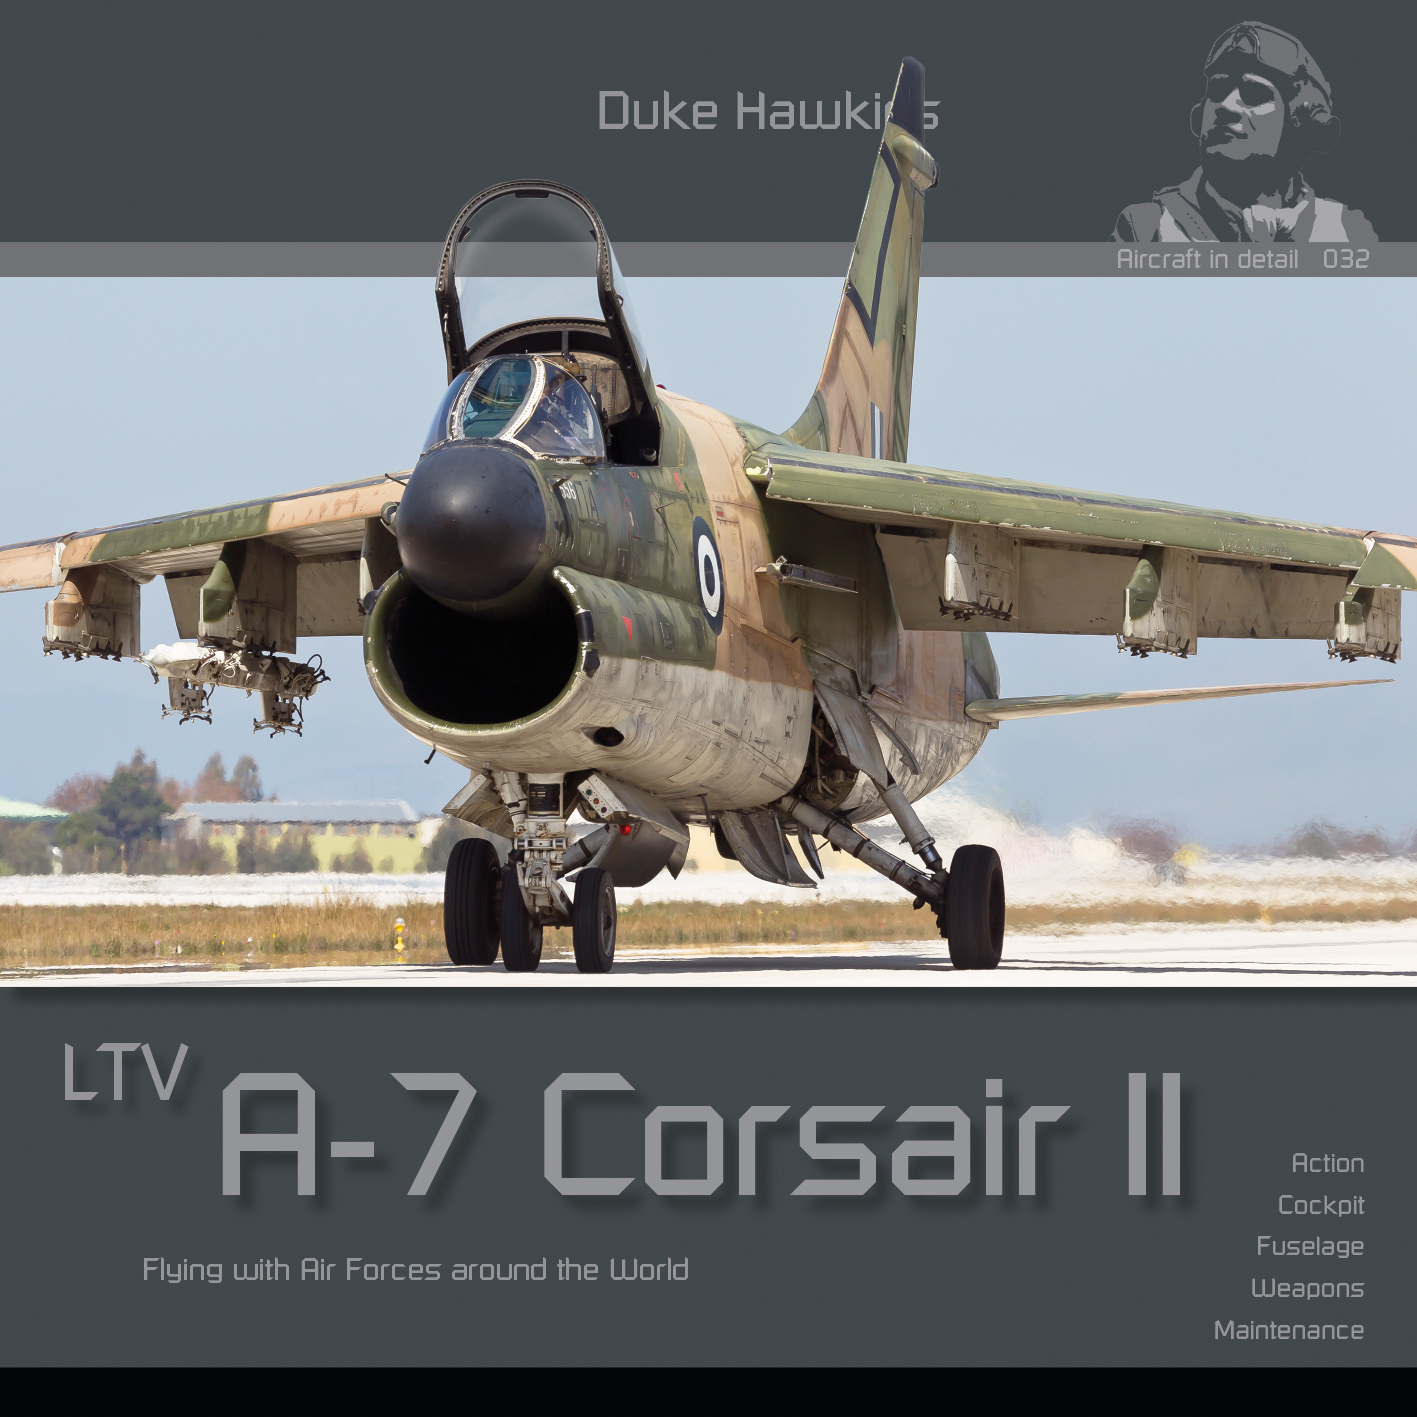 Duke Hawkins: A-7 Corsair II flying with Air Forces around the World  - EN